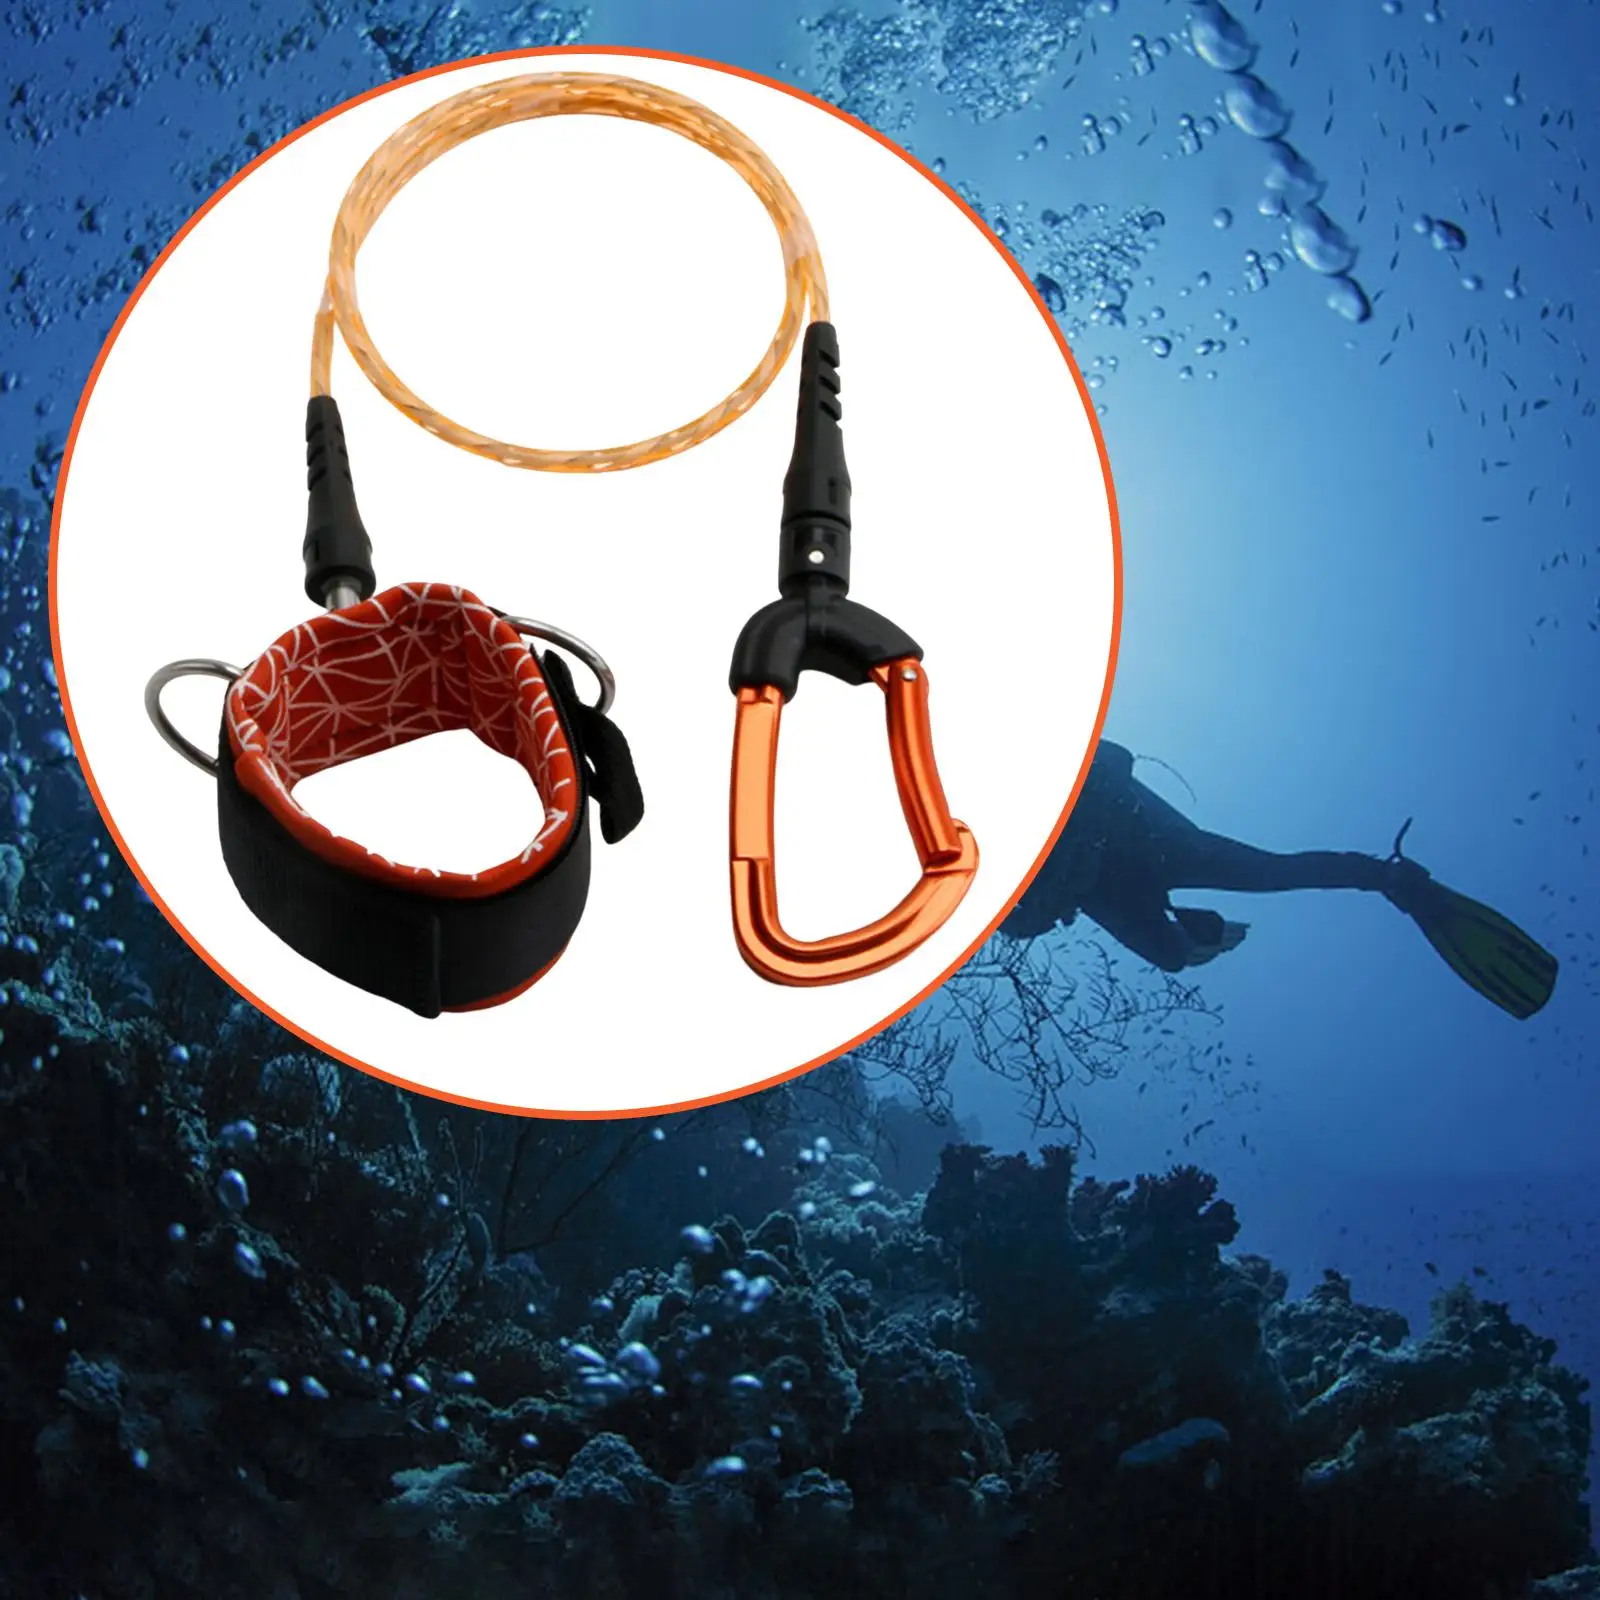 Freediving Lanyard Wristband Strap Security Leash Portable Scuba Diving Rope for Scuba Diving Diving Snorkeling Freediving